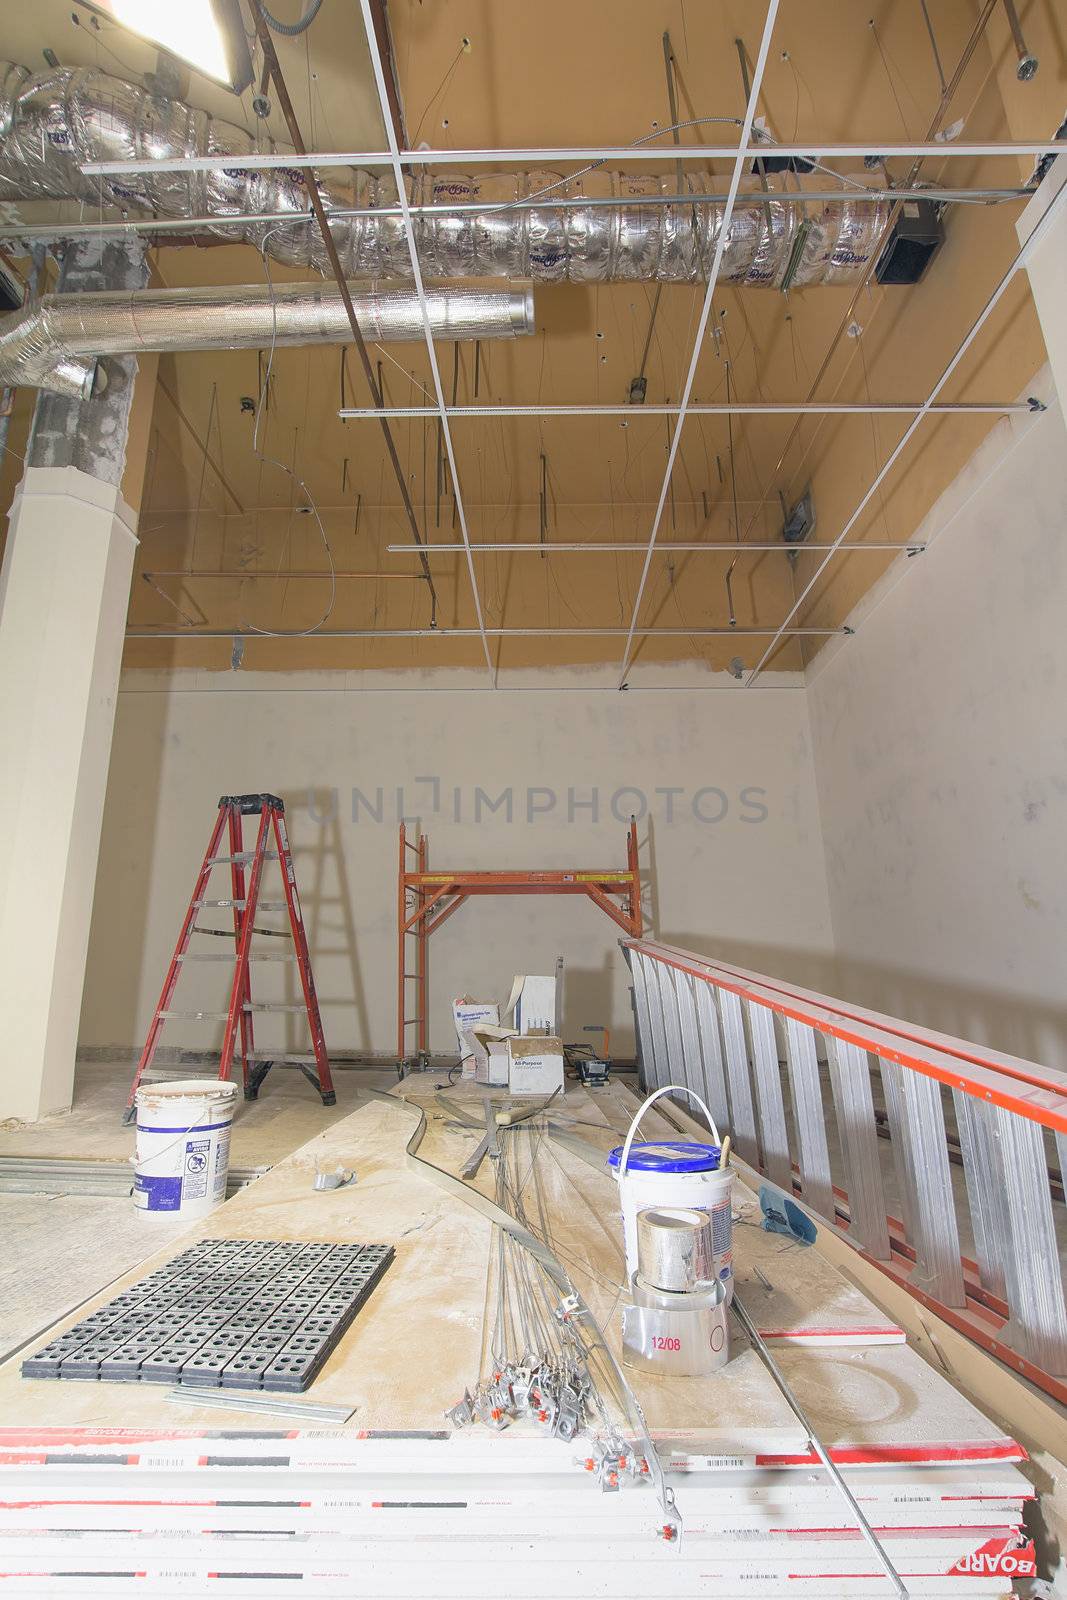 Commercial Space Construction Renovation with Heating Cooling Duct Work Drywall and Ceiling